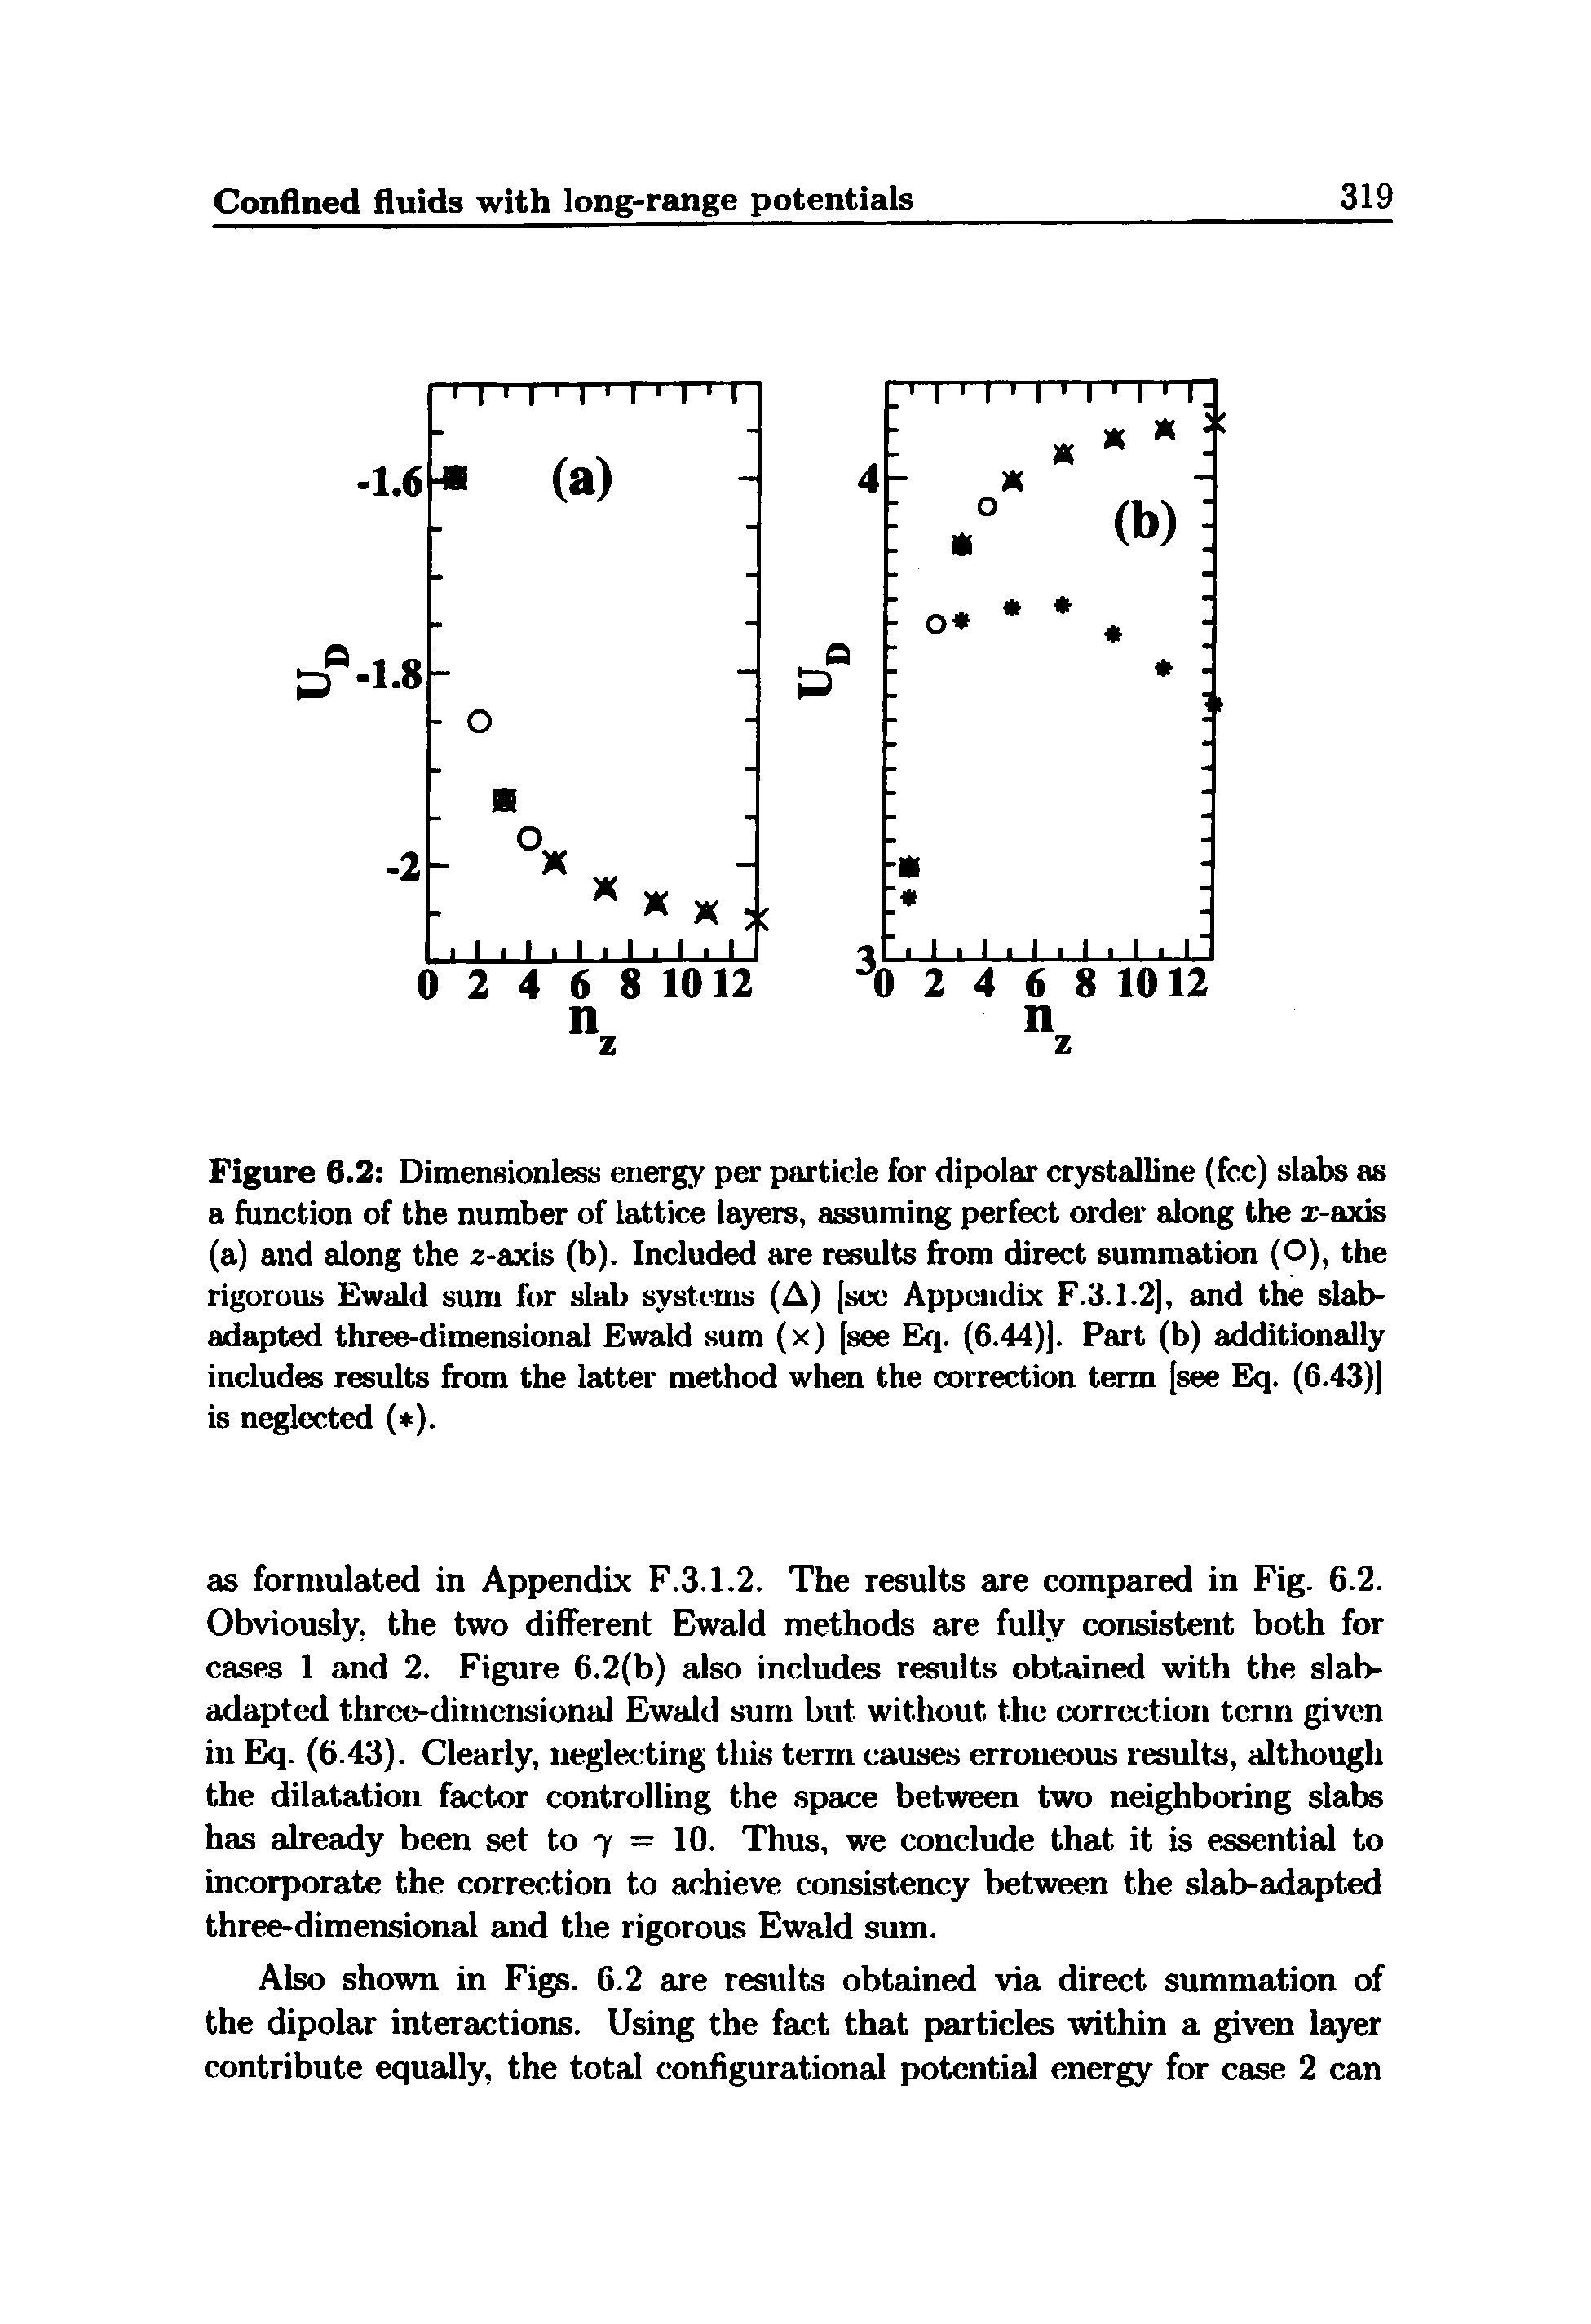 Figure 6.2 Dimensionless energy per particle for dipolar crystalline (fee) slabs as a function of the number of lattice layers, assuming perfect order along the ar-axis (a) and along the z-axis (b). Included are results from direct summation (O), the rigorous Ewald sum for slab systems (A) (sec Appendix F.3.1.2], and the slab-adapted three-dimensional Ewald sum (x) [see Eq. (6.44)j. Part (b) additionally includes results from the latter method when the correction term [see Eq. (6.43)) is neglected ( ).